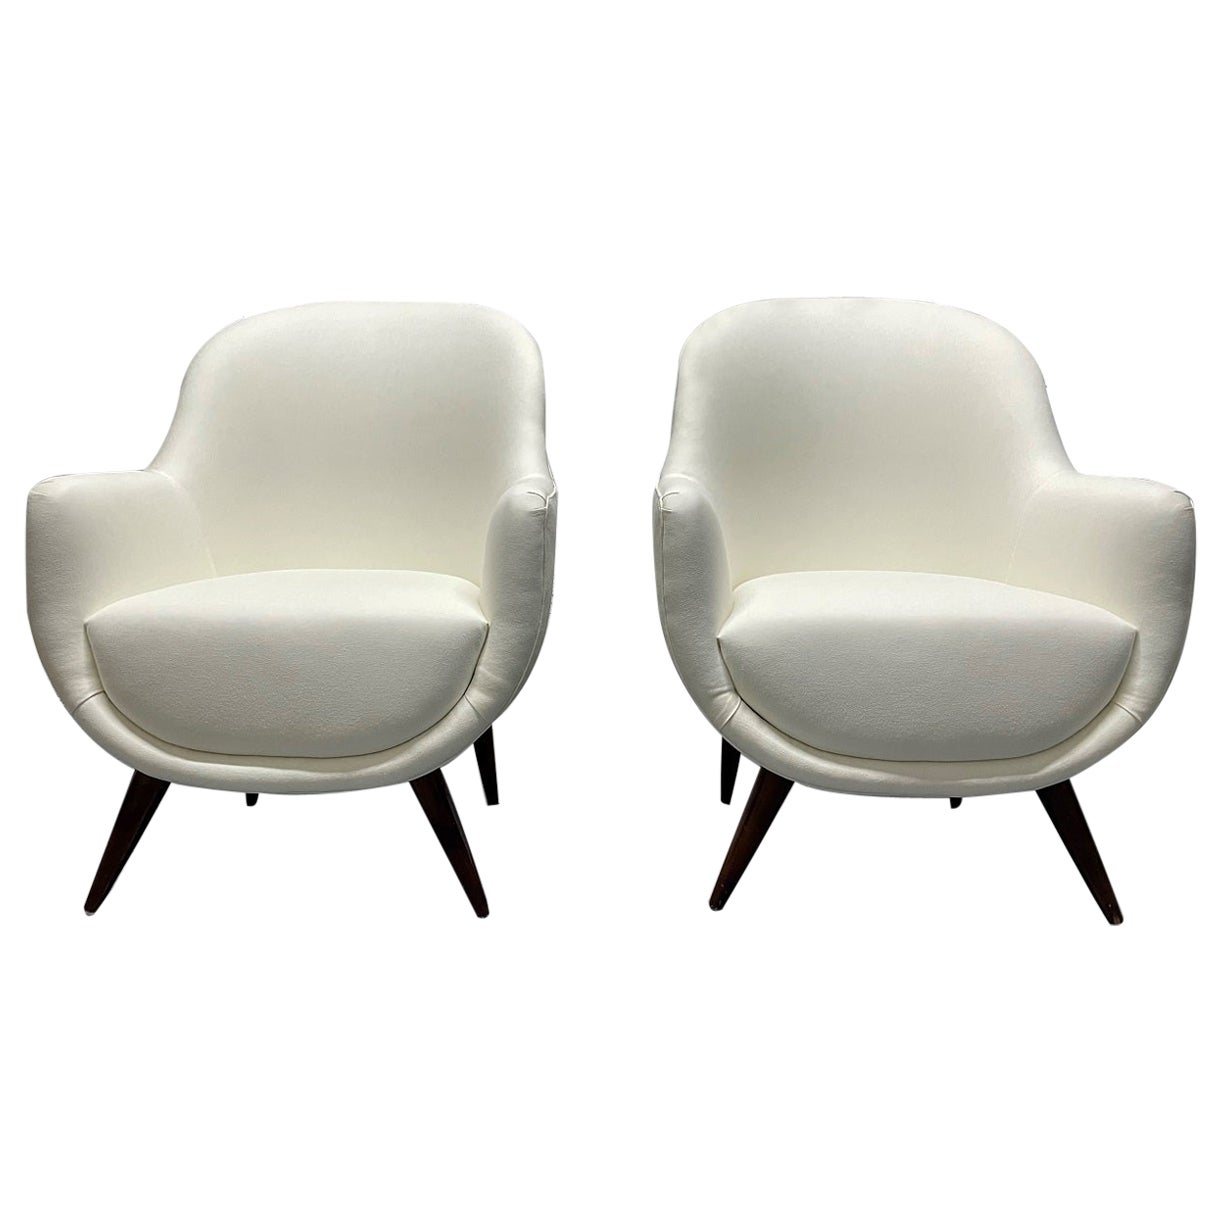 Pair of Italian Style Lounge Chairs For Sale